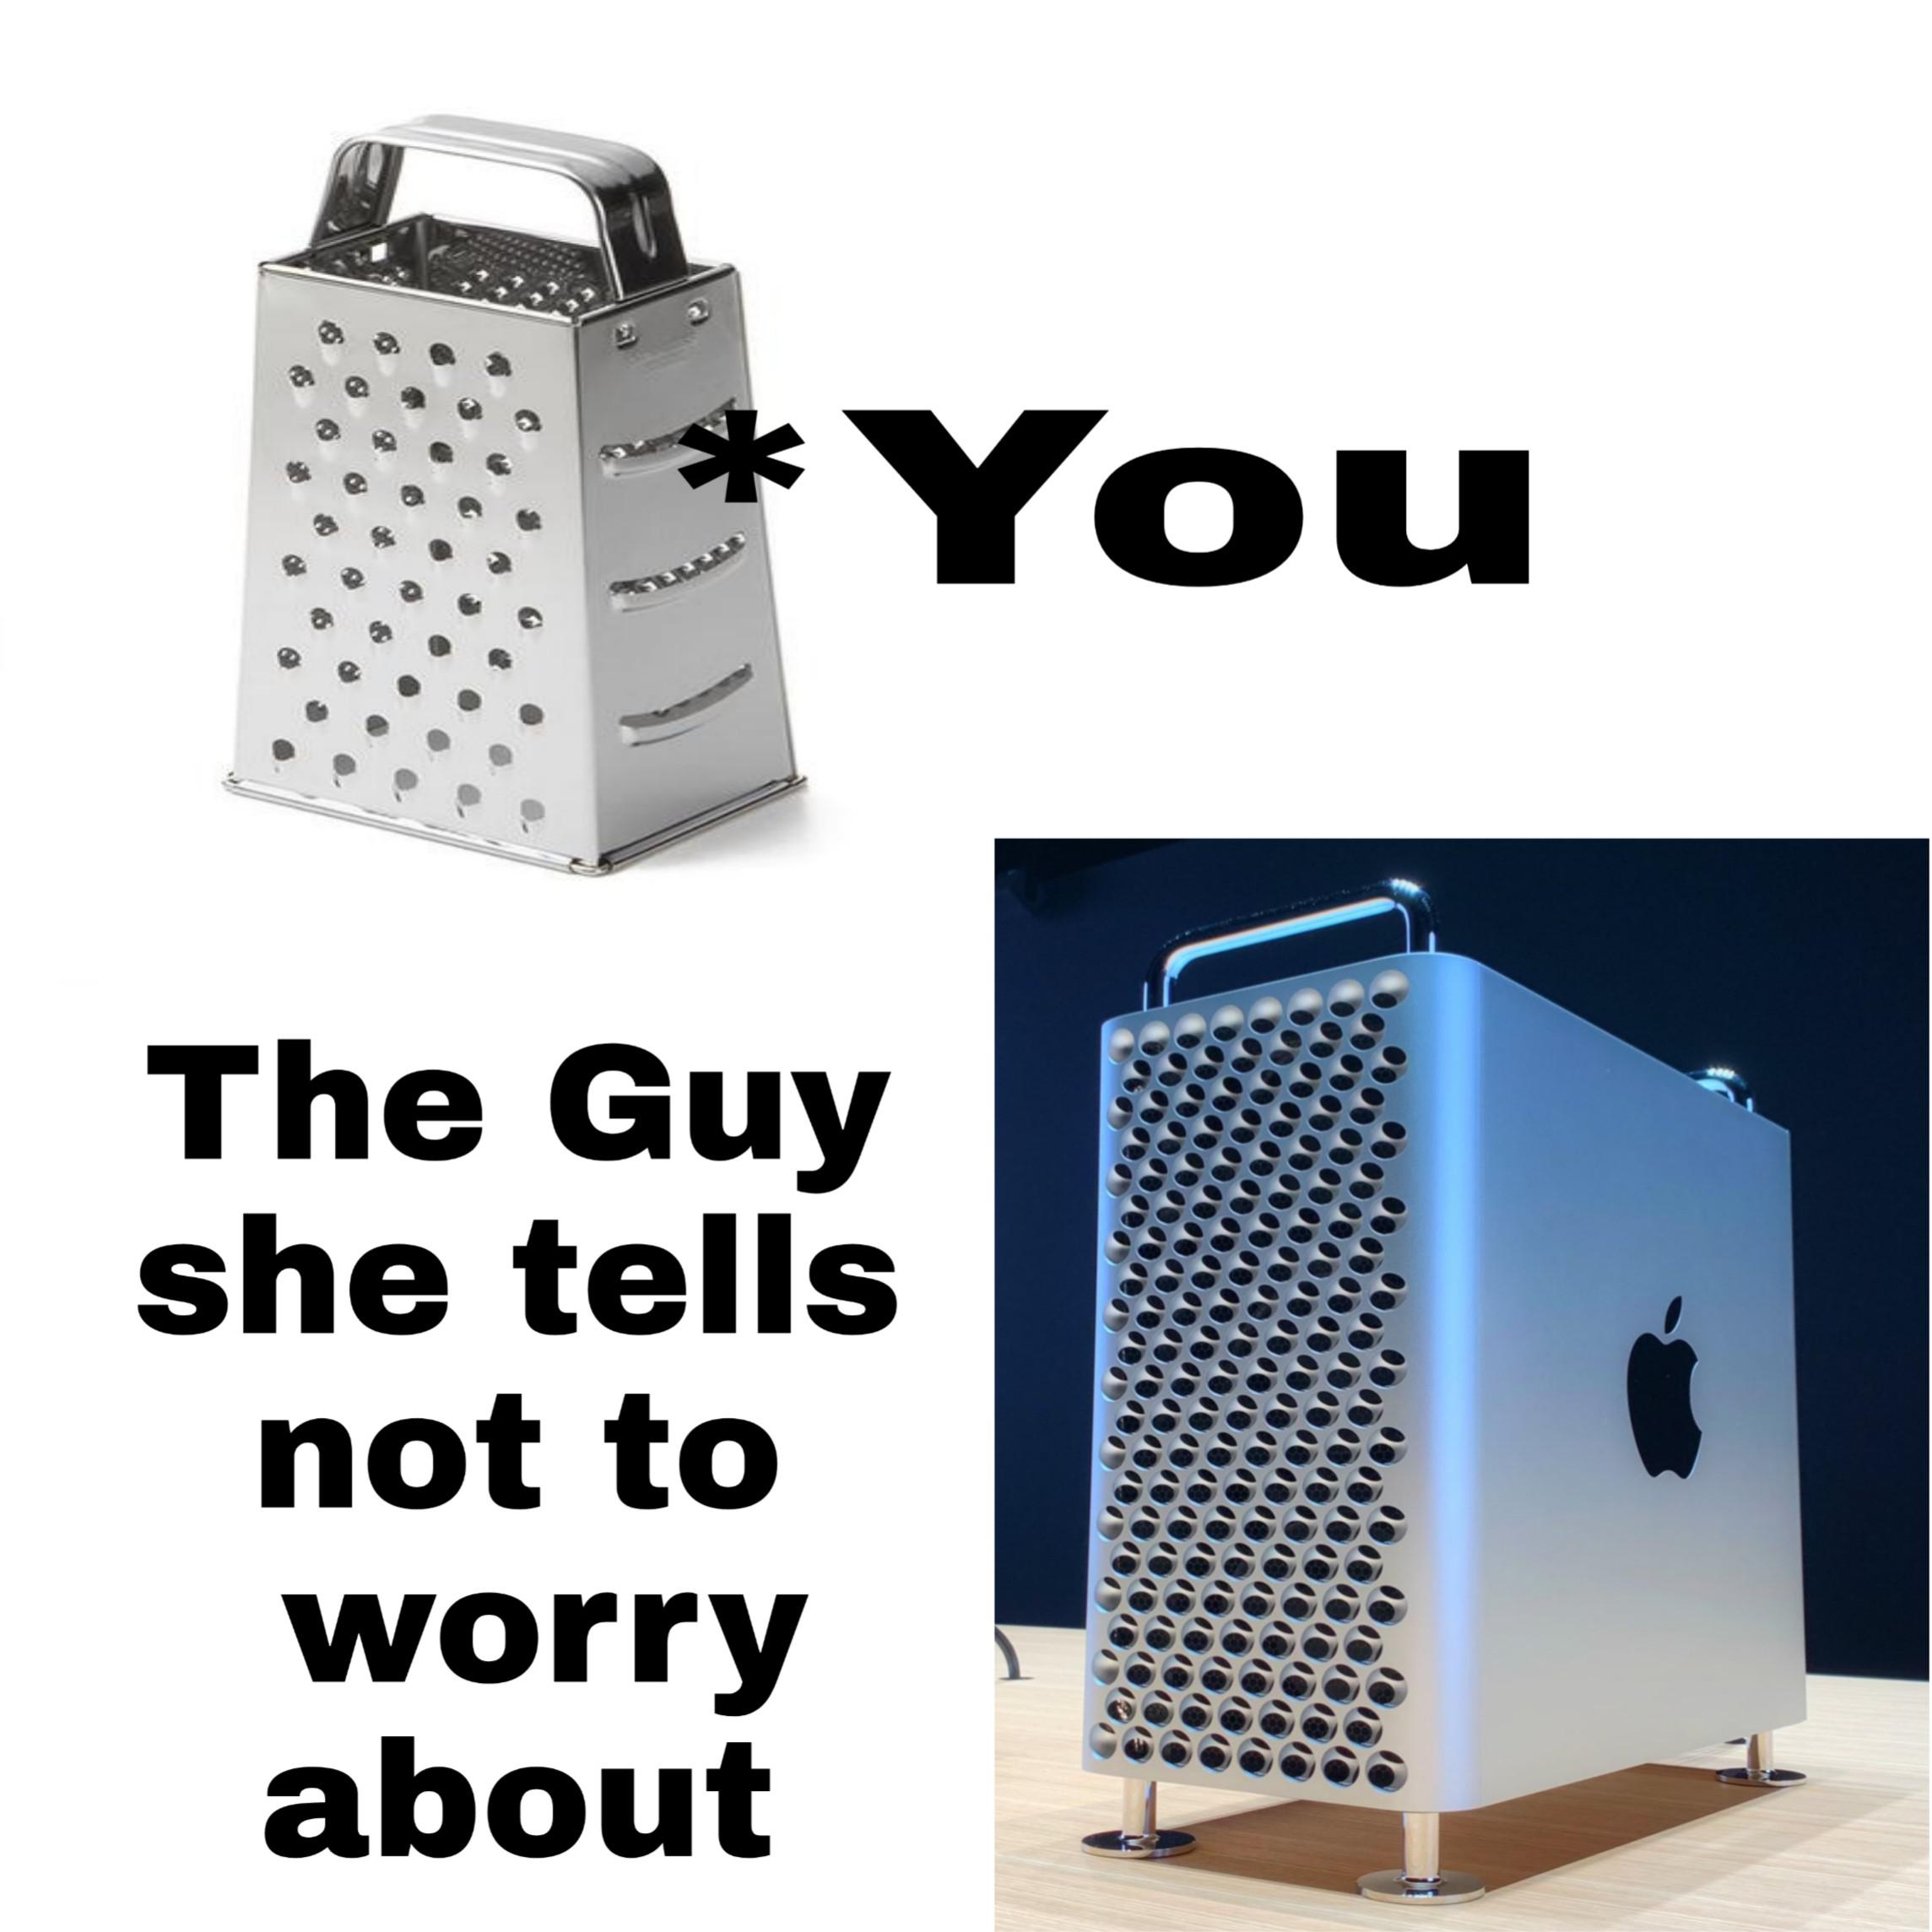 Mac Pro Cheese Grater Meme - You verse the guy she told you not to worry about